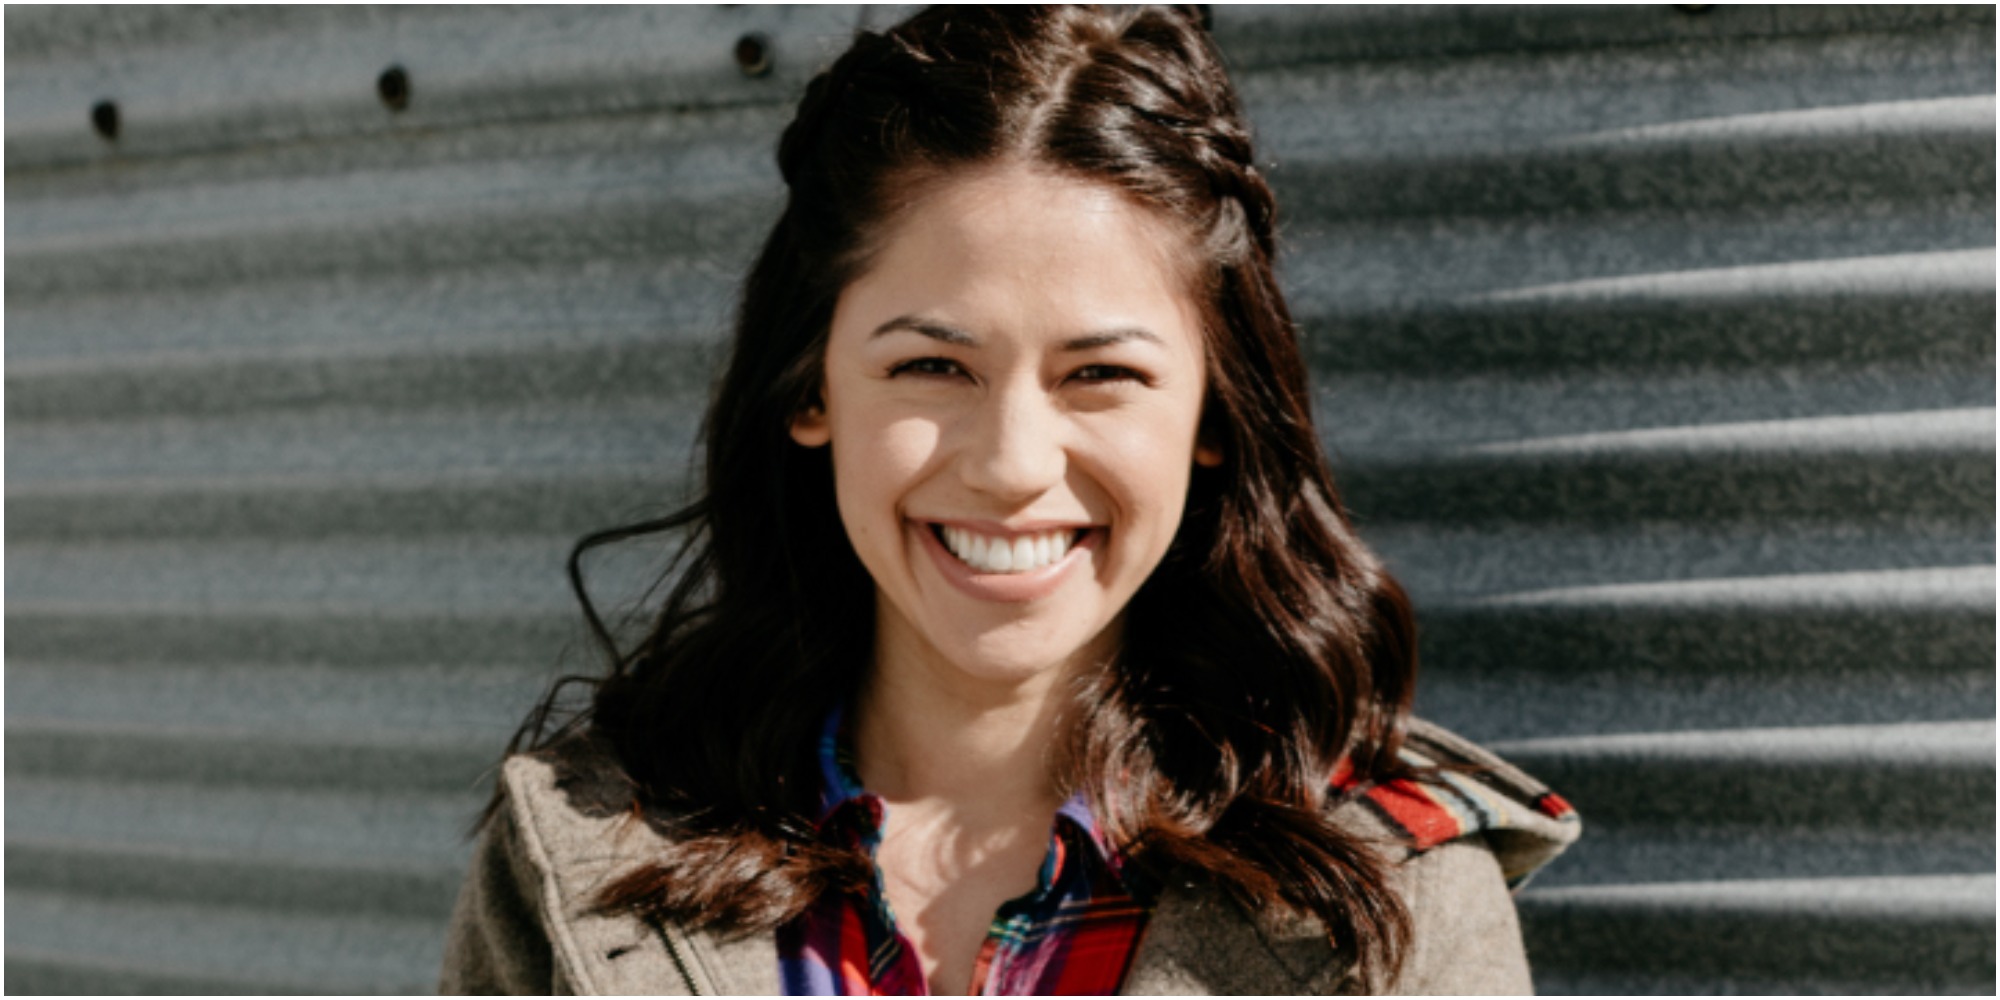 Molly Yeh the star of Girl Meets Farm smiles for the camera.